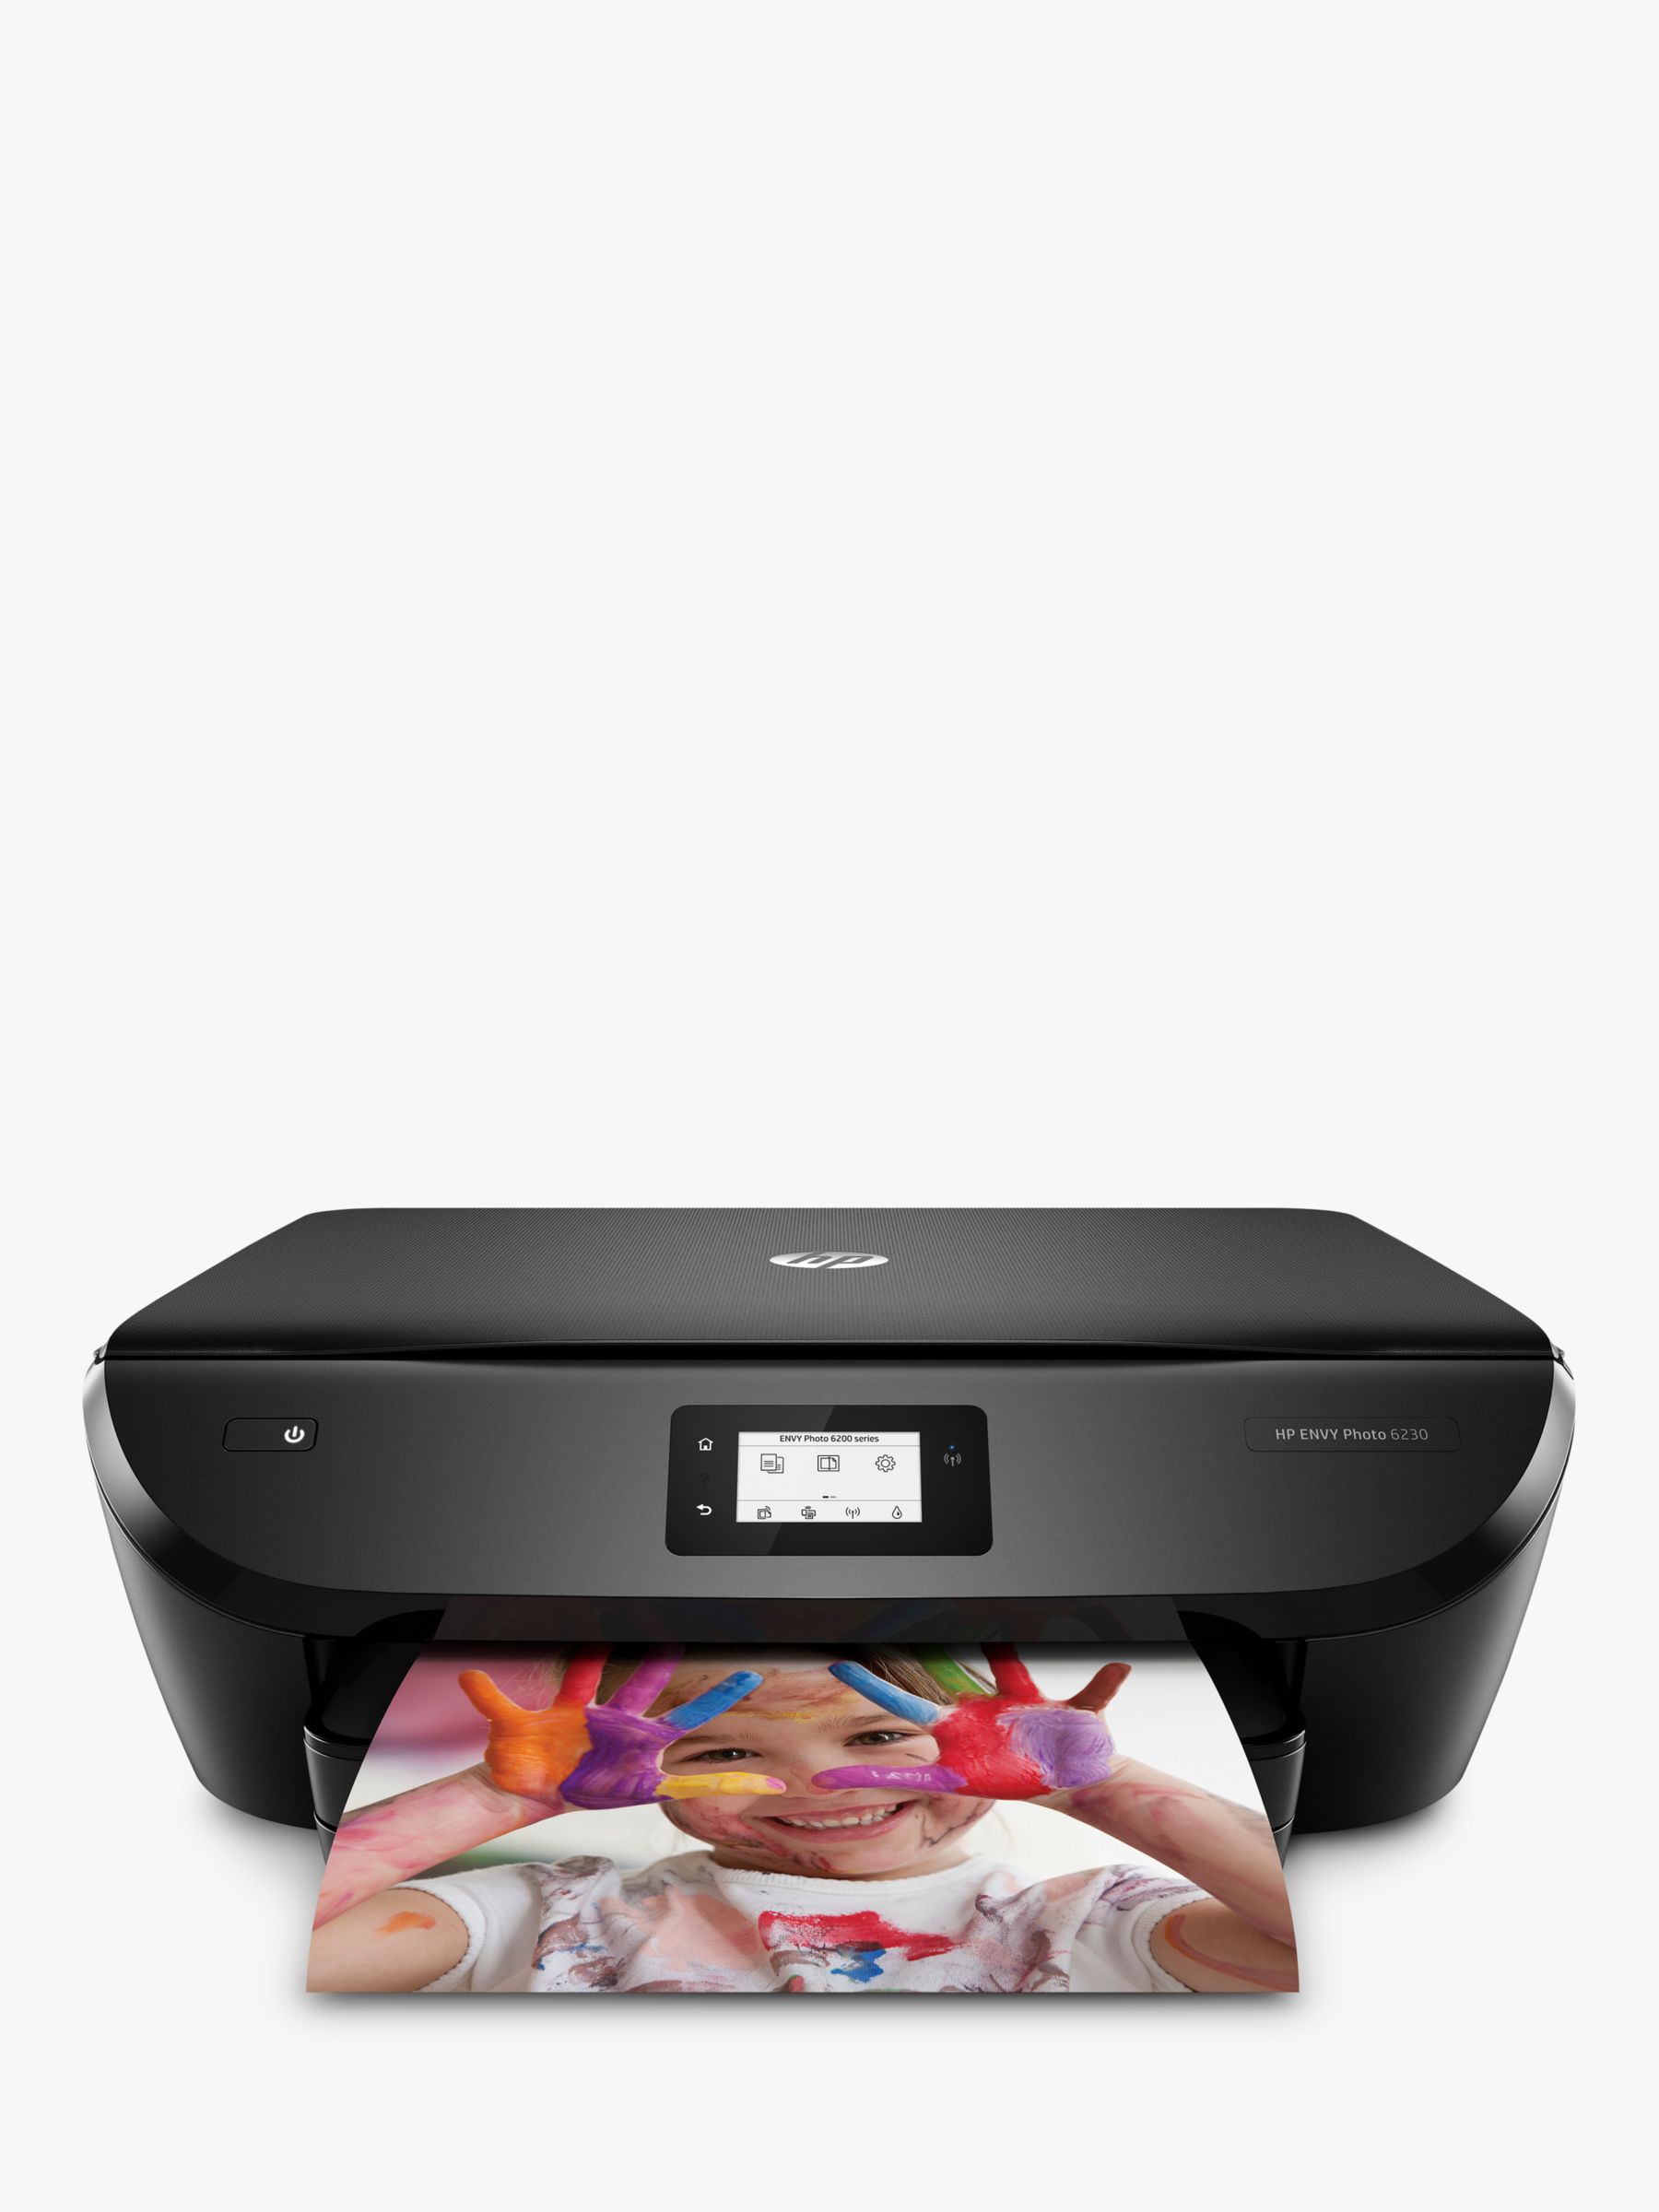 Hp Envy Photo 6230 All In One Wireless Printer With Touch Screen